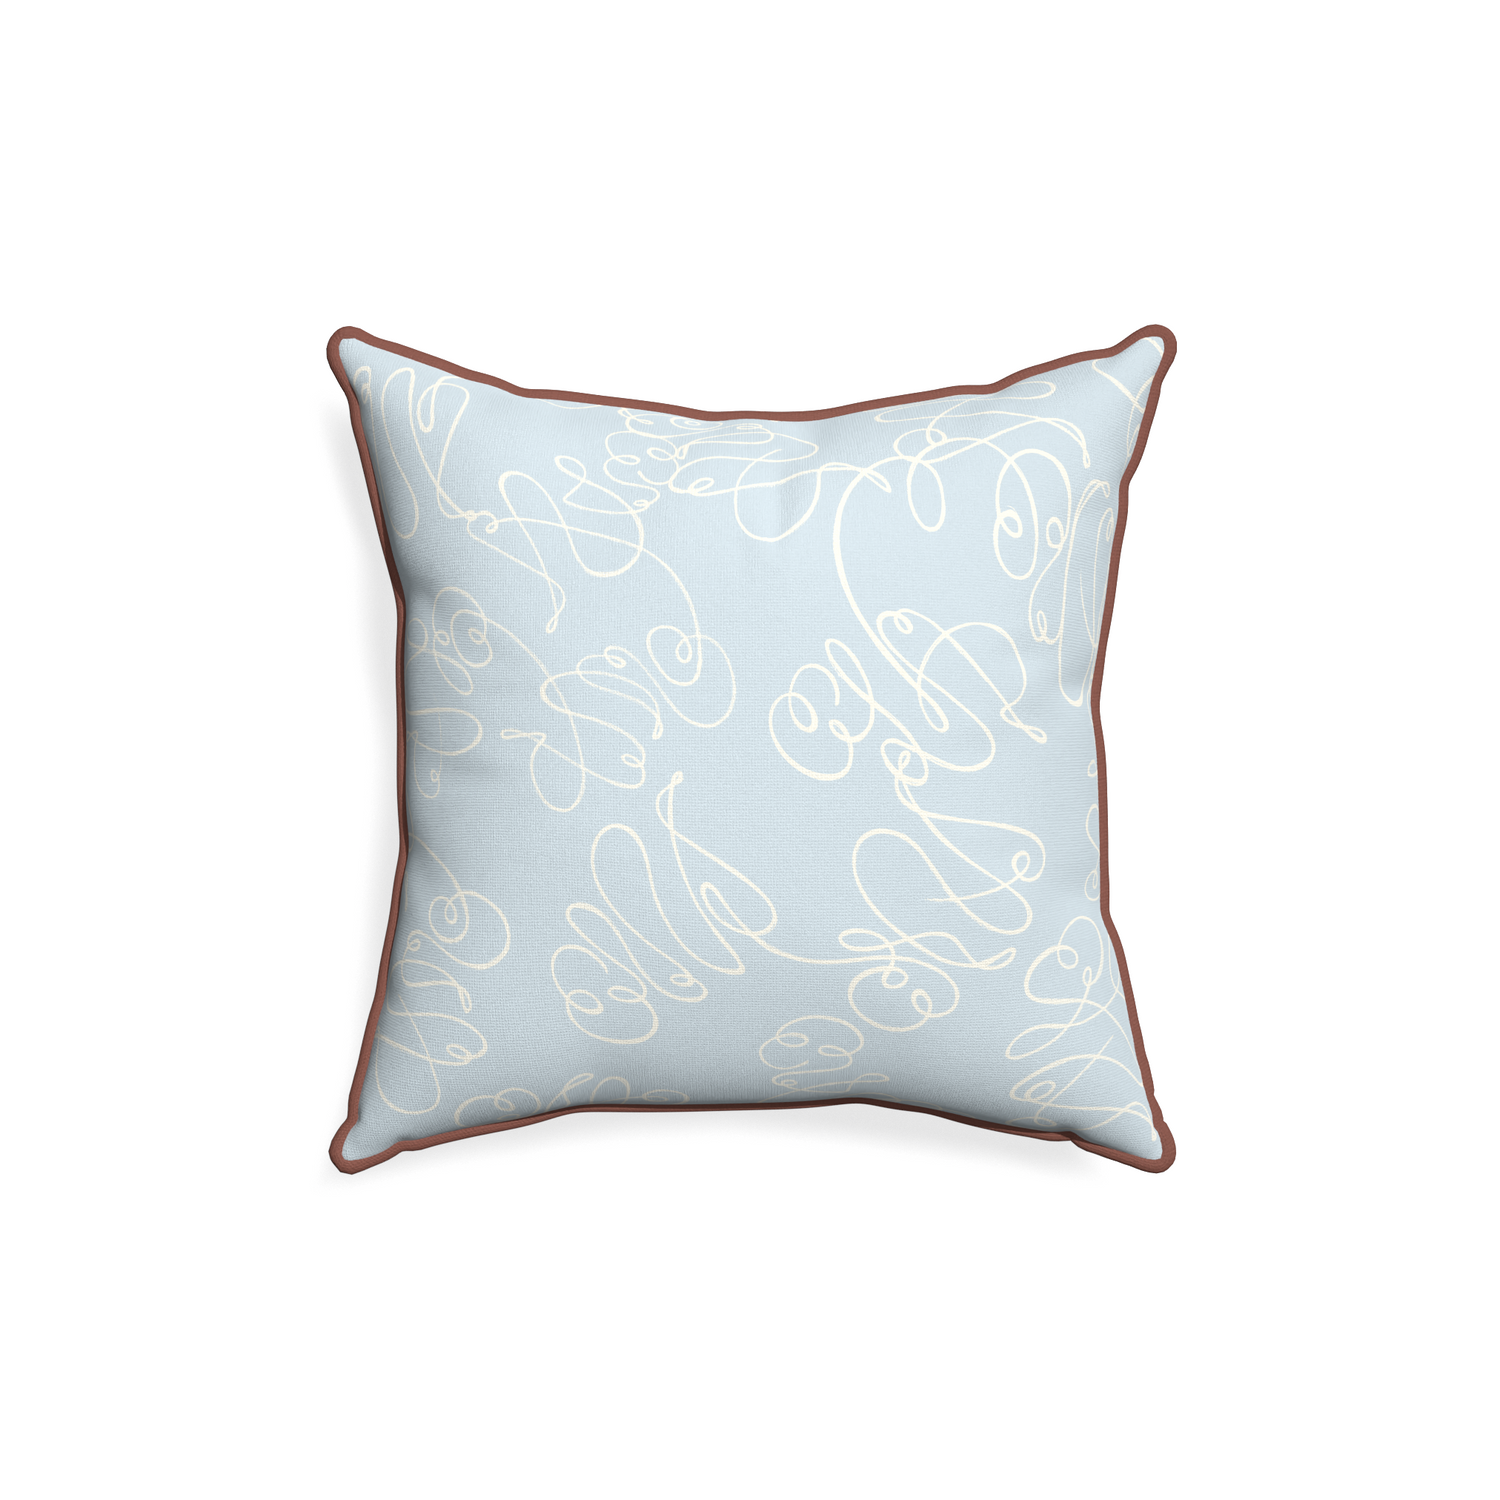 18-square mirabella custom powder blue abstractpillow with w piping on white background